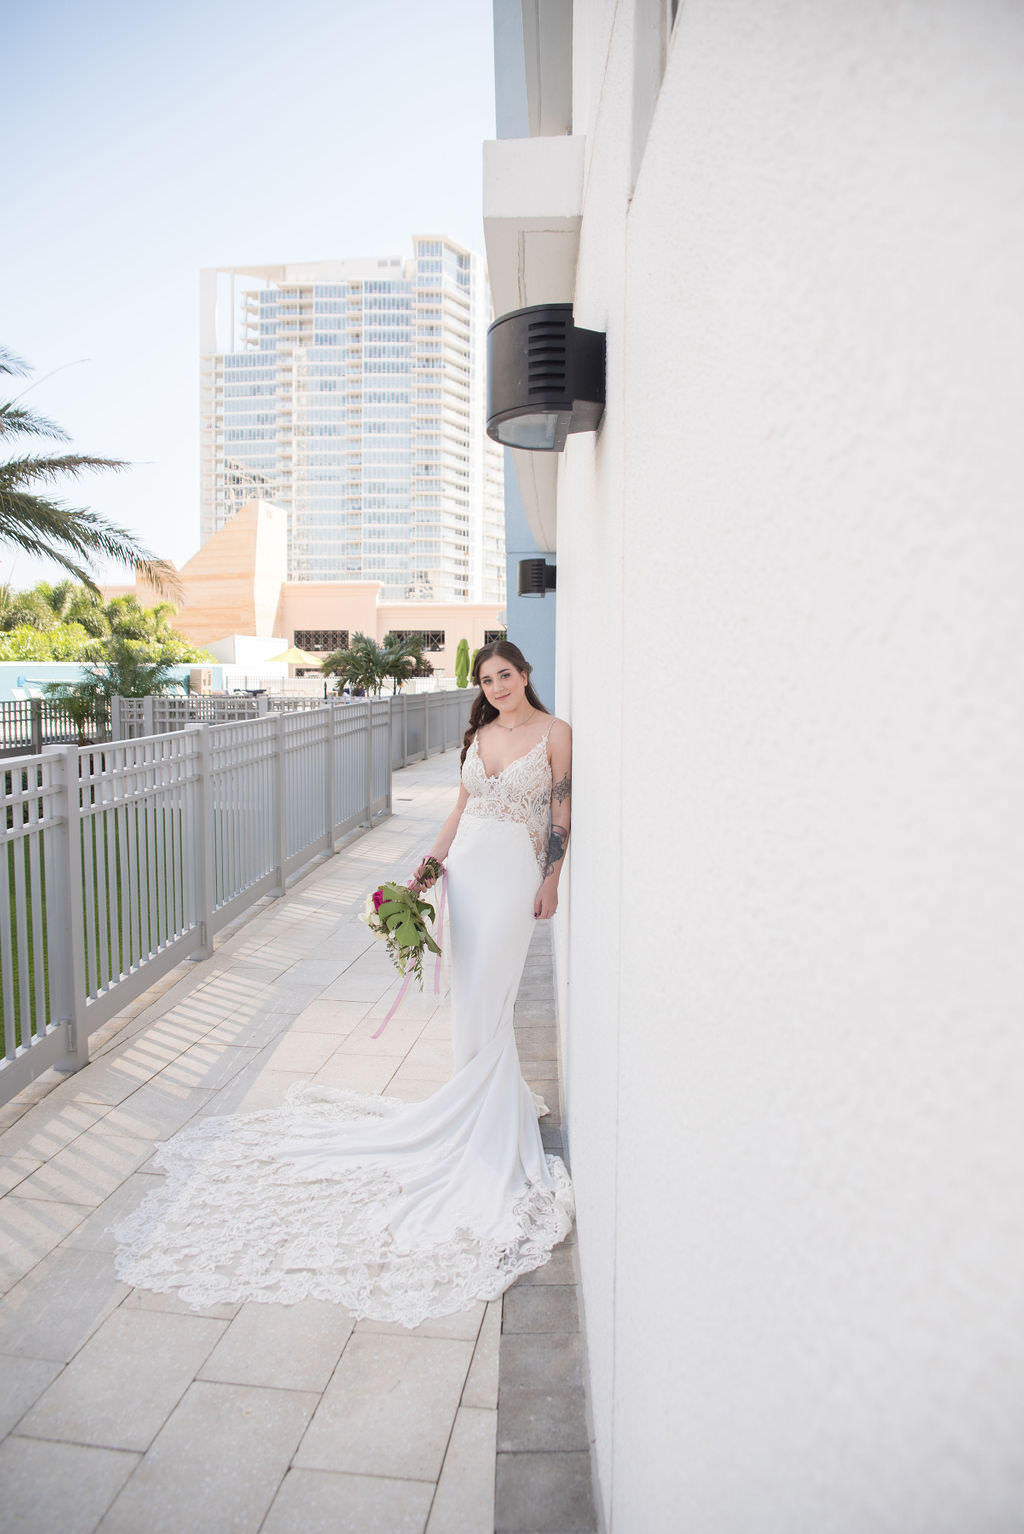 Elegant Bride Beauty Wedding Portrait in Fitted Lace and Illusion V Neckline Wedding Dress | Tampa Bay Wedding Photographer Kristen Marie Photography | Palm Harbor Wedding Attire Nikki's Glitz and Glam Boutique | Downtown St. Pete Wedding Venue Hyatt Place Downtown St. Pete